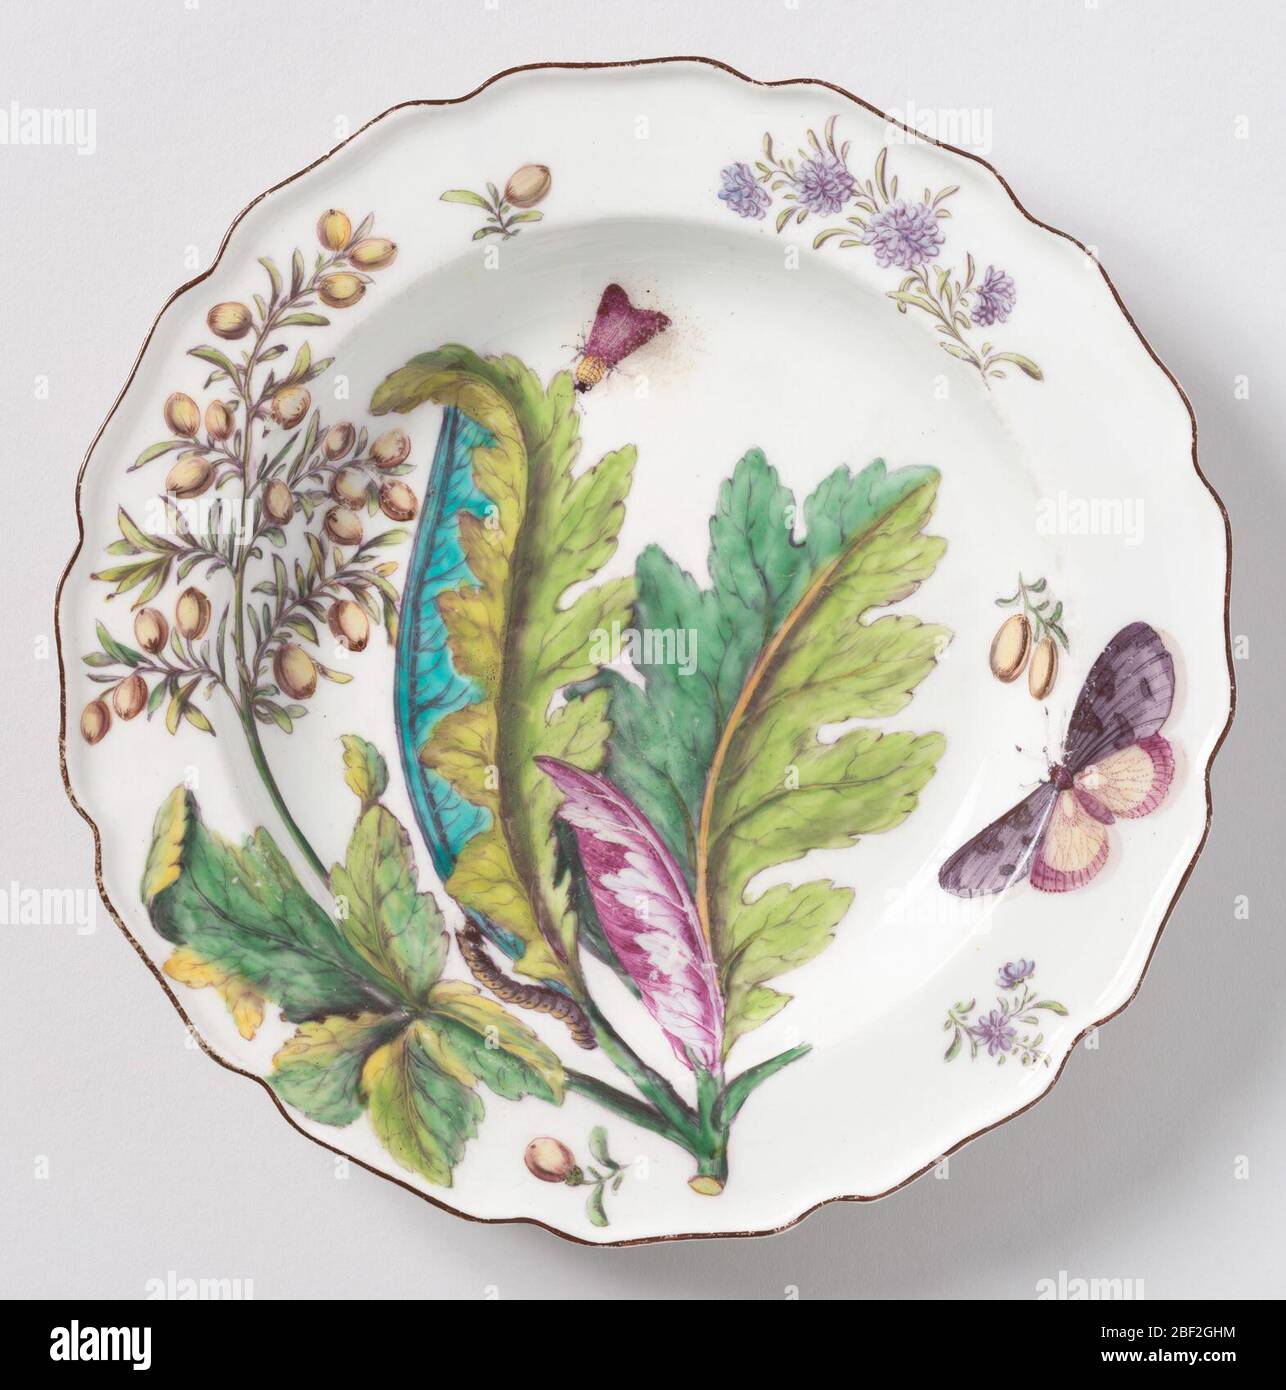 Plate. A plate with a wavy, brown-edged rim painted with a branch of bocconia/parrot weed (Bocconia frutescens) leaves, various sprigs, a caterpillar, and two winged insects. Stock Photo